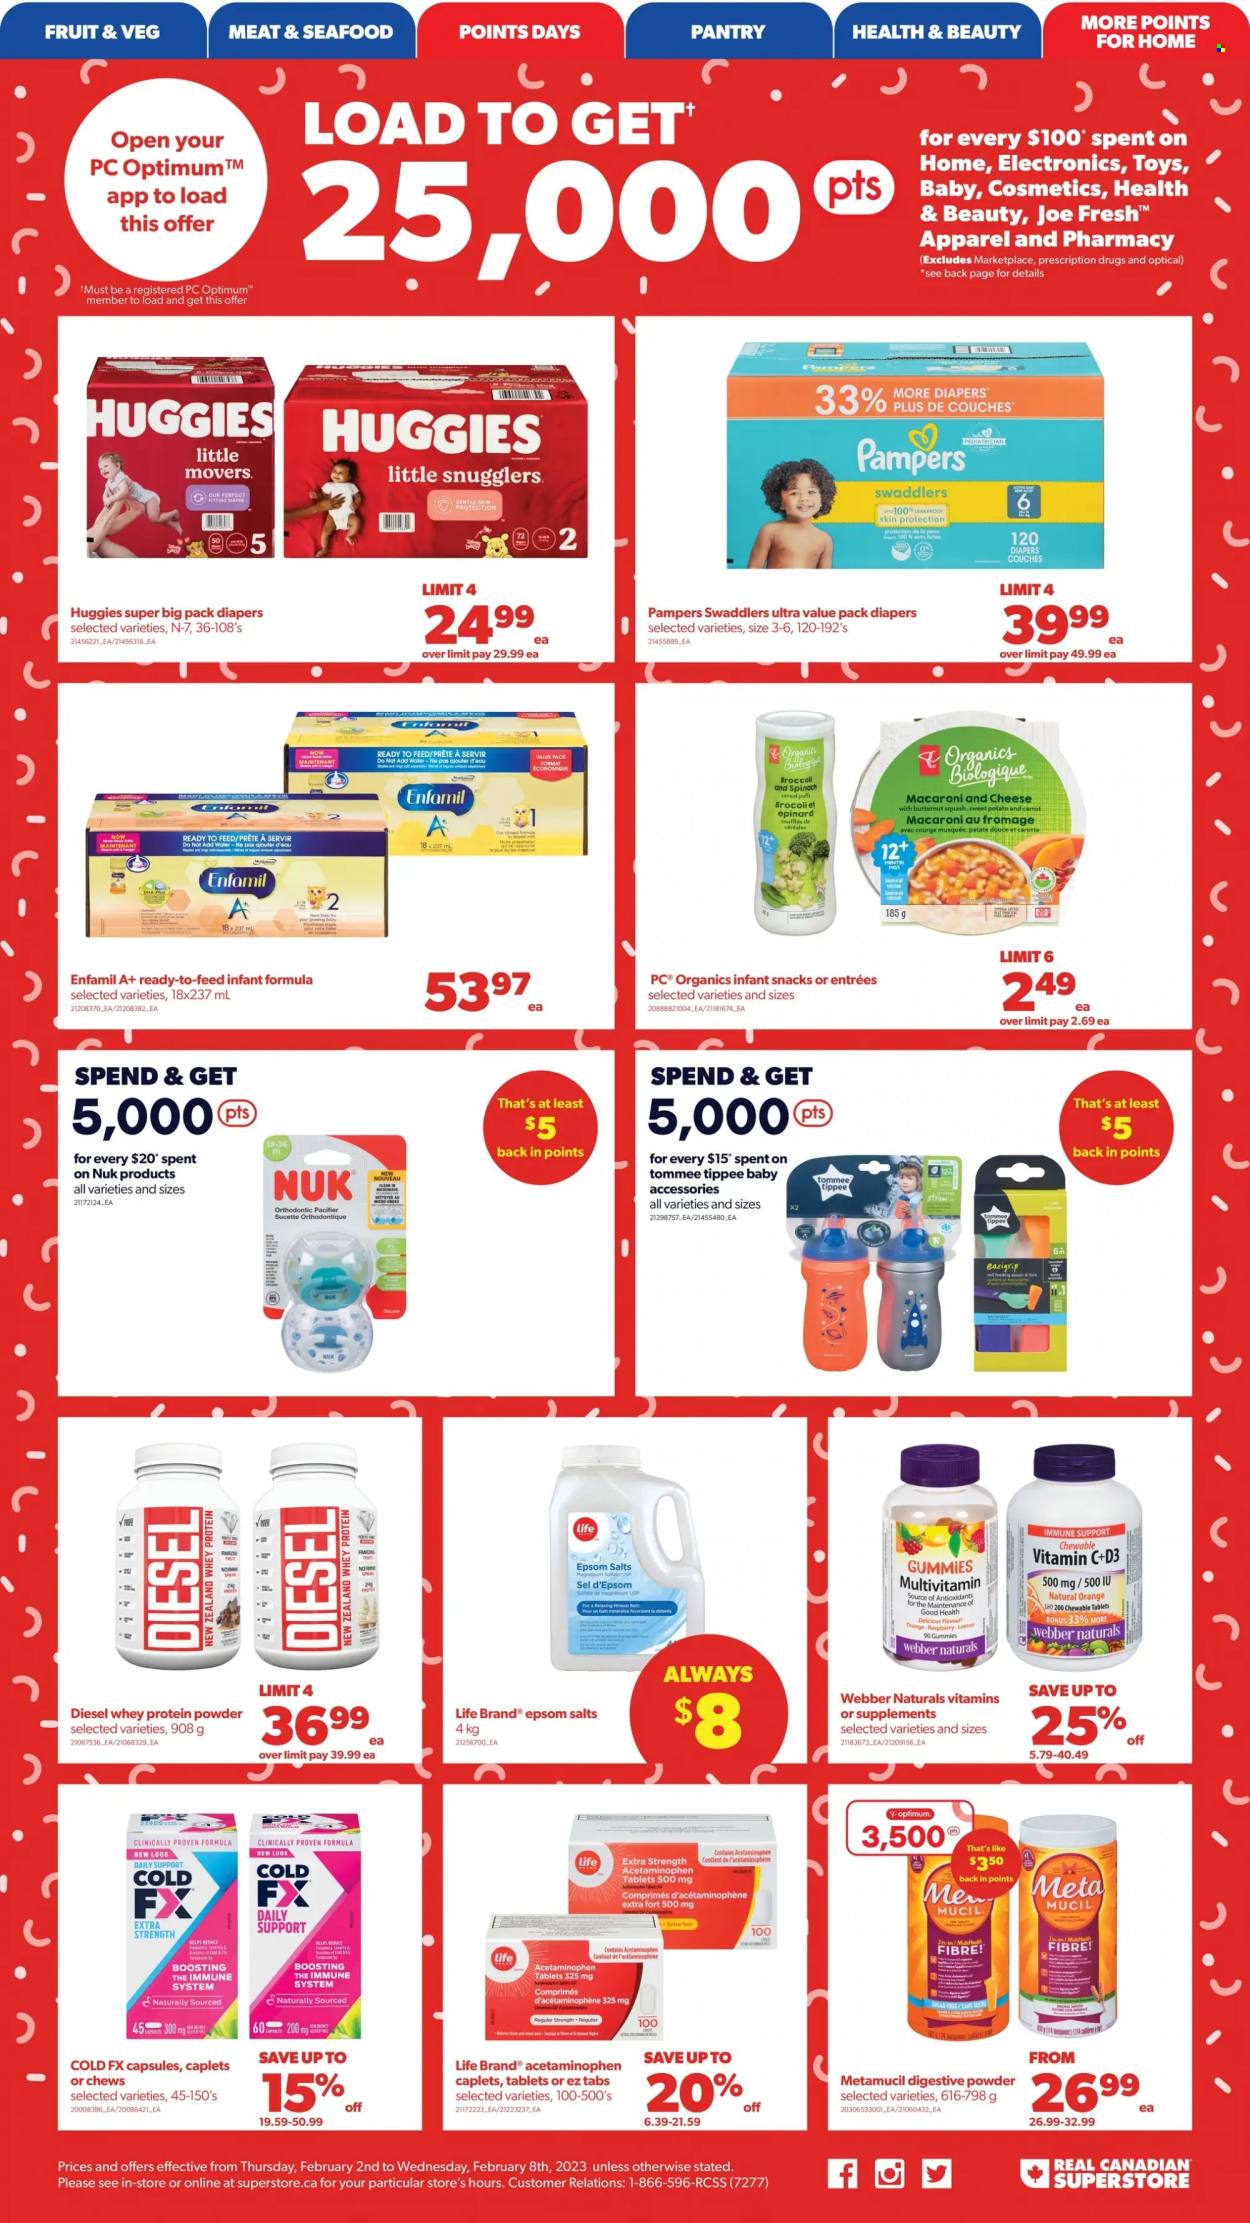 thumbnail - Real Canadian Superstore Flyer - February 02, 2023 - February 08, 2023 - Sales products - broccoli, butternut squash, sweet potato, oranges, seafood, macaroni & cheese, snack, chewing gum, sugar, cereals, Enfamil, Pampers, nappies, Nuk, fork, spoon, Optimum, toys, Cold & Flu, magnesium, multivitamin, vitamin c, whey protein, vitamin D3, Metamucil, calcium, Huggies. Page 15.